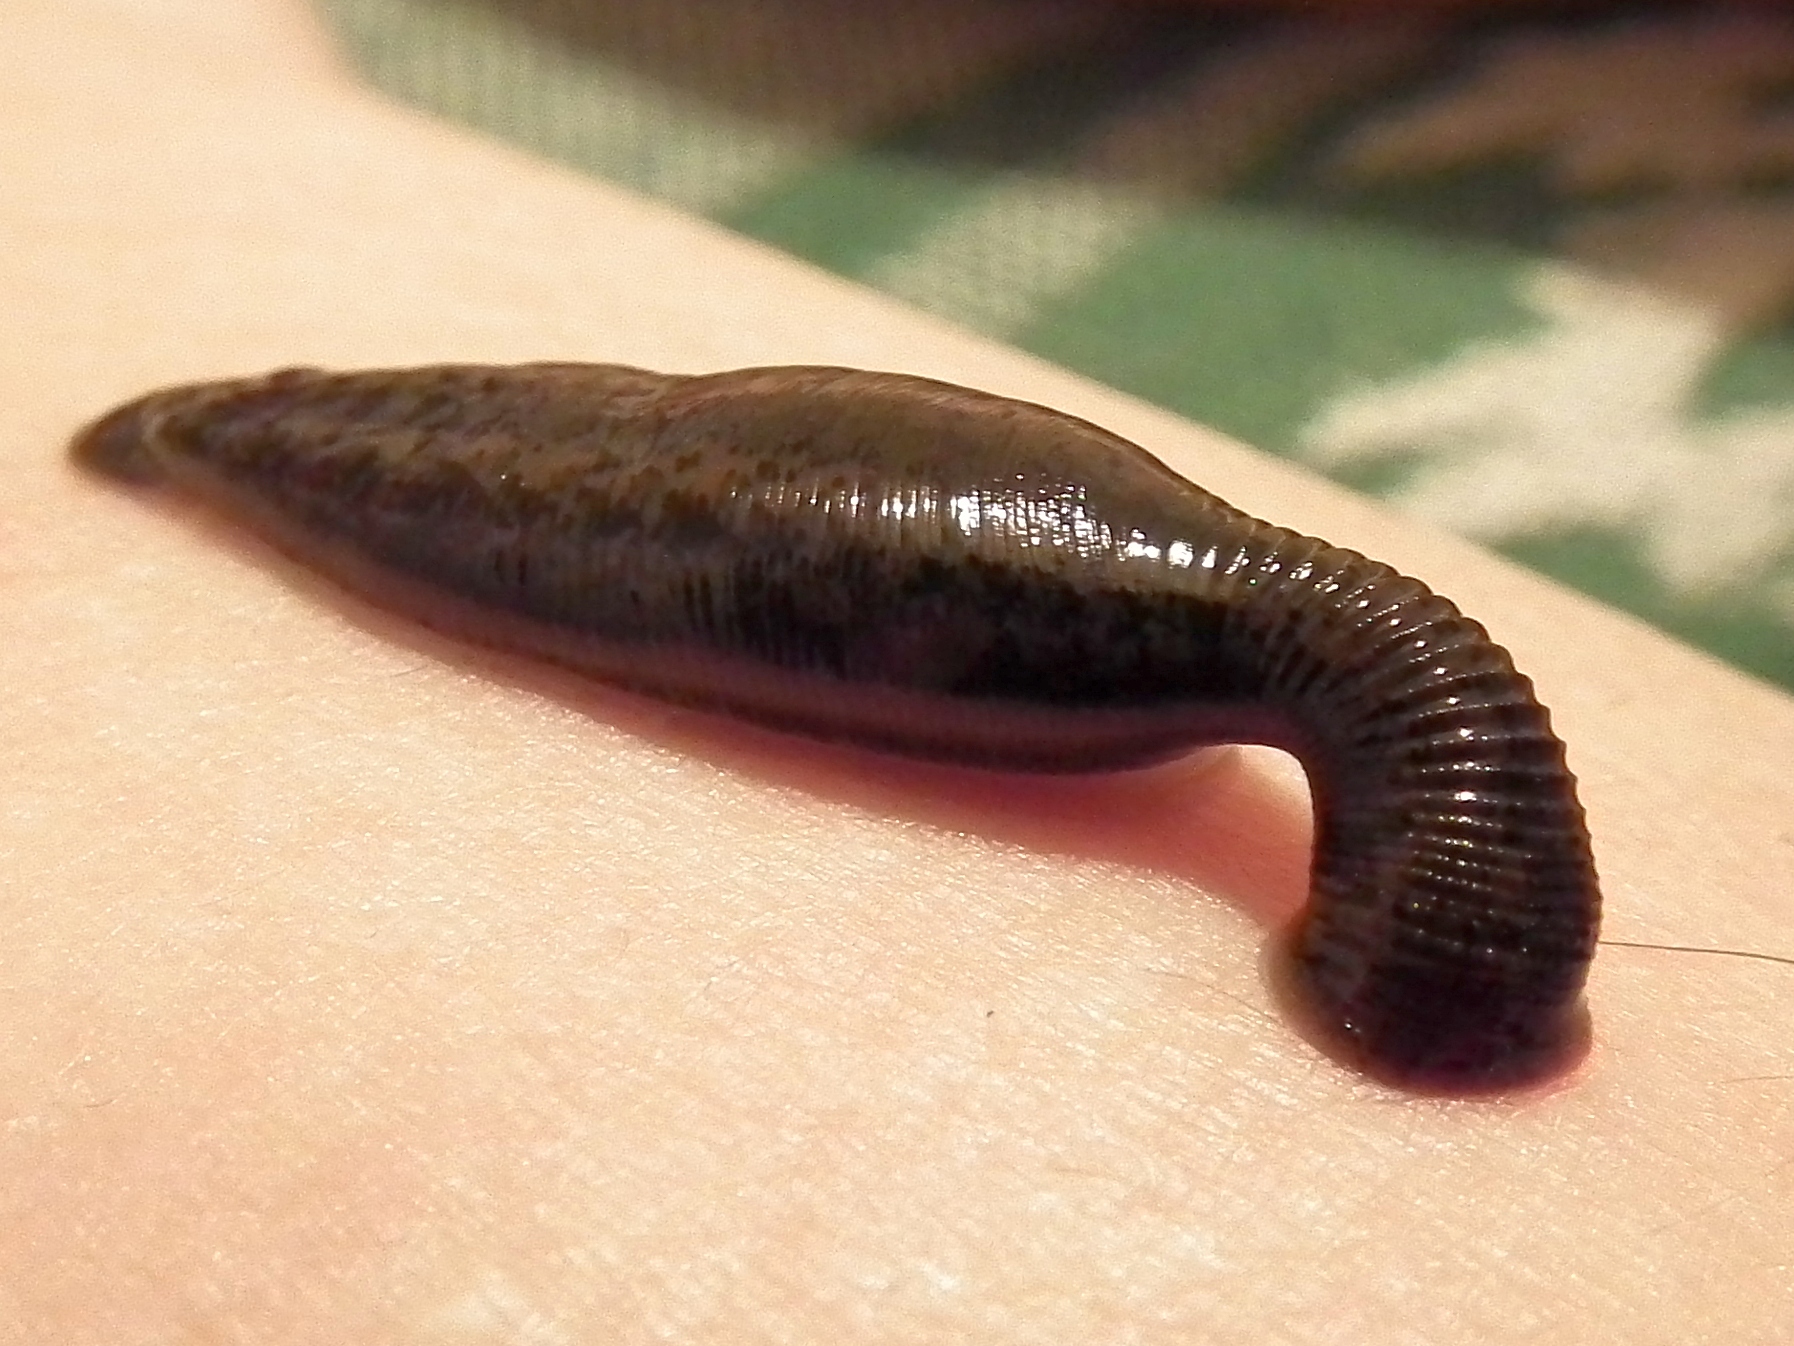 The leech Hirudo medicinalis sucking blood. Although blood-letting is used less frequently by doctors, some leech species are regarded as endangered species because they have been over-harvested for this purpose in the last few centuries.